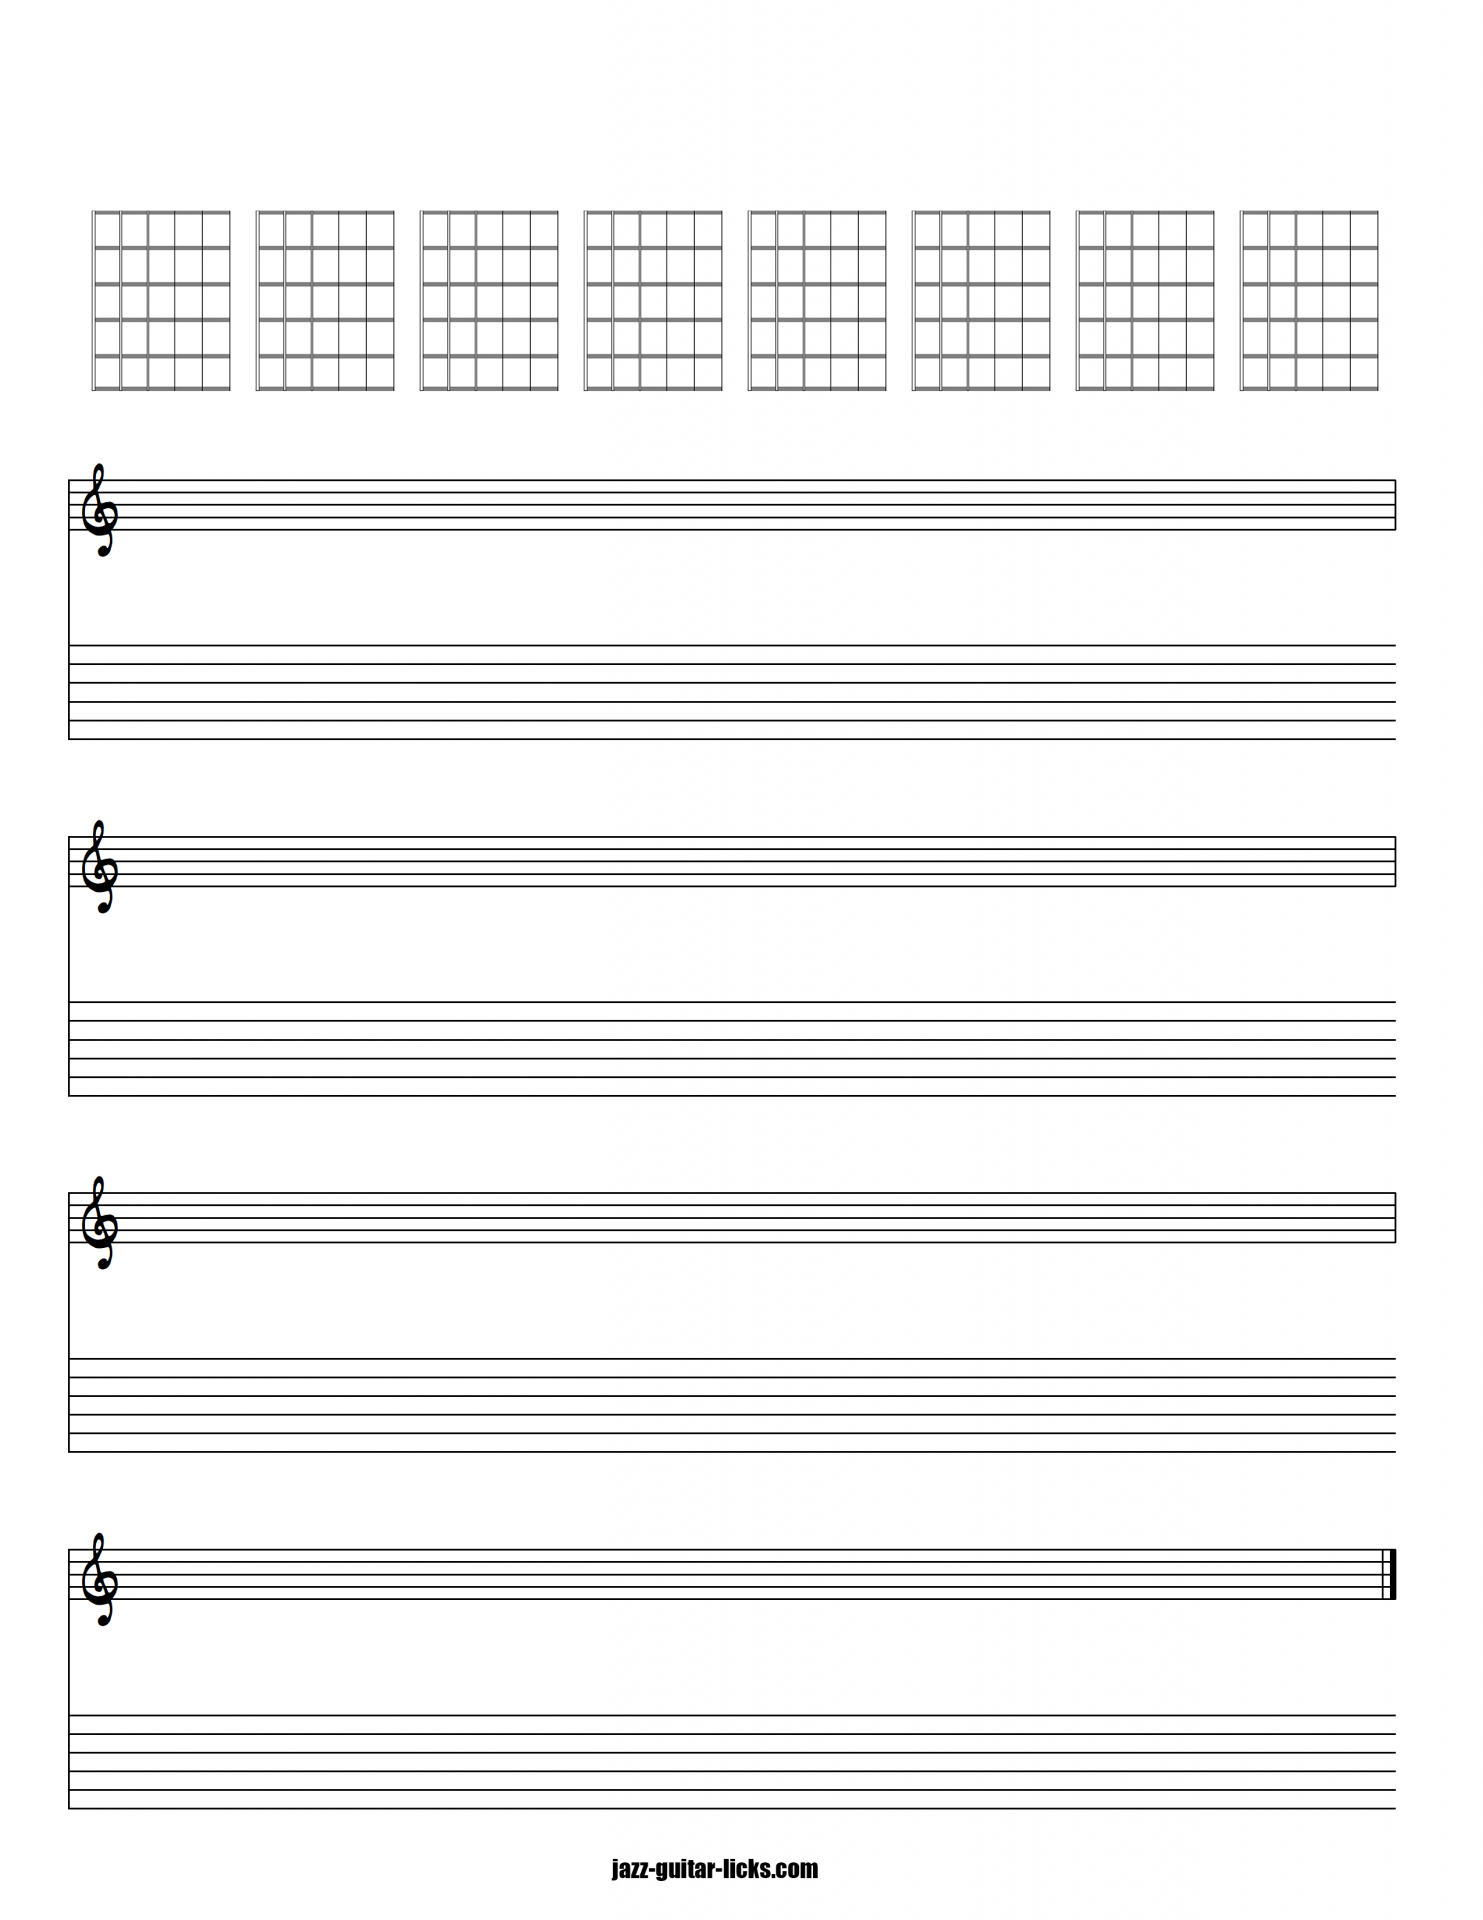 Blank guitar tab stave and chords